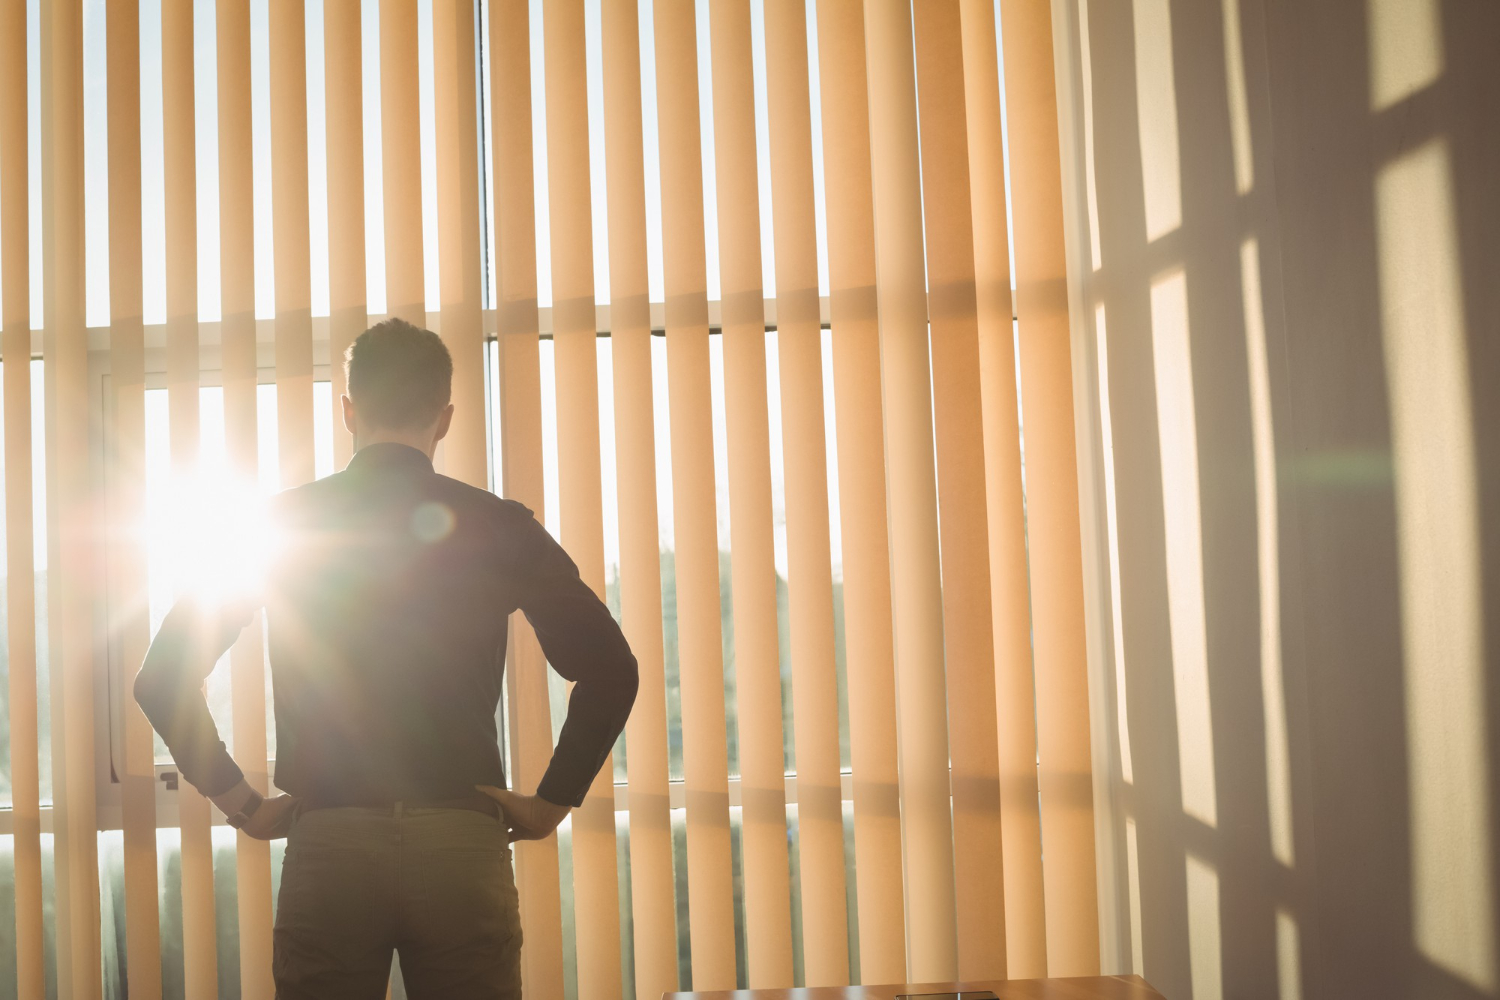 Man standing with hands on hips near window with vertical blinds